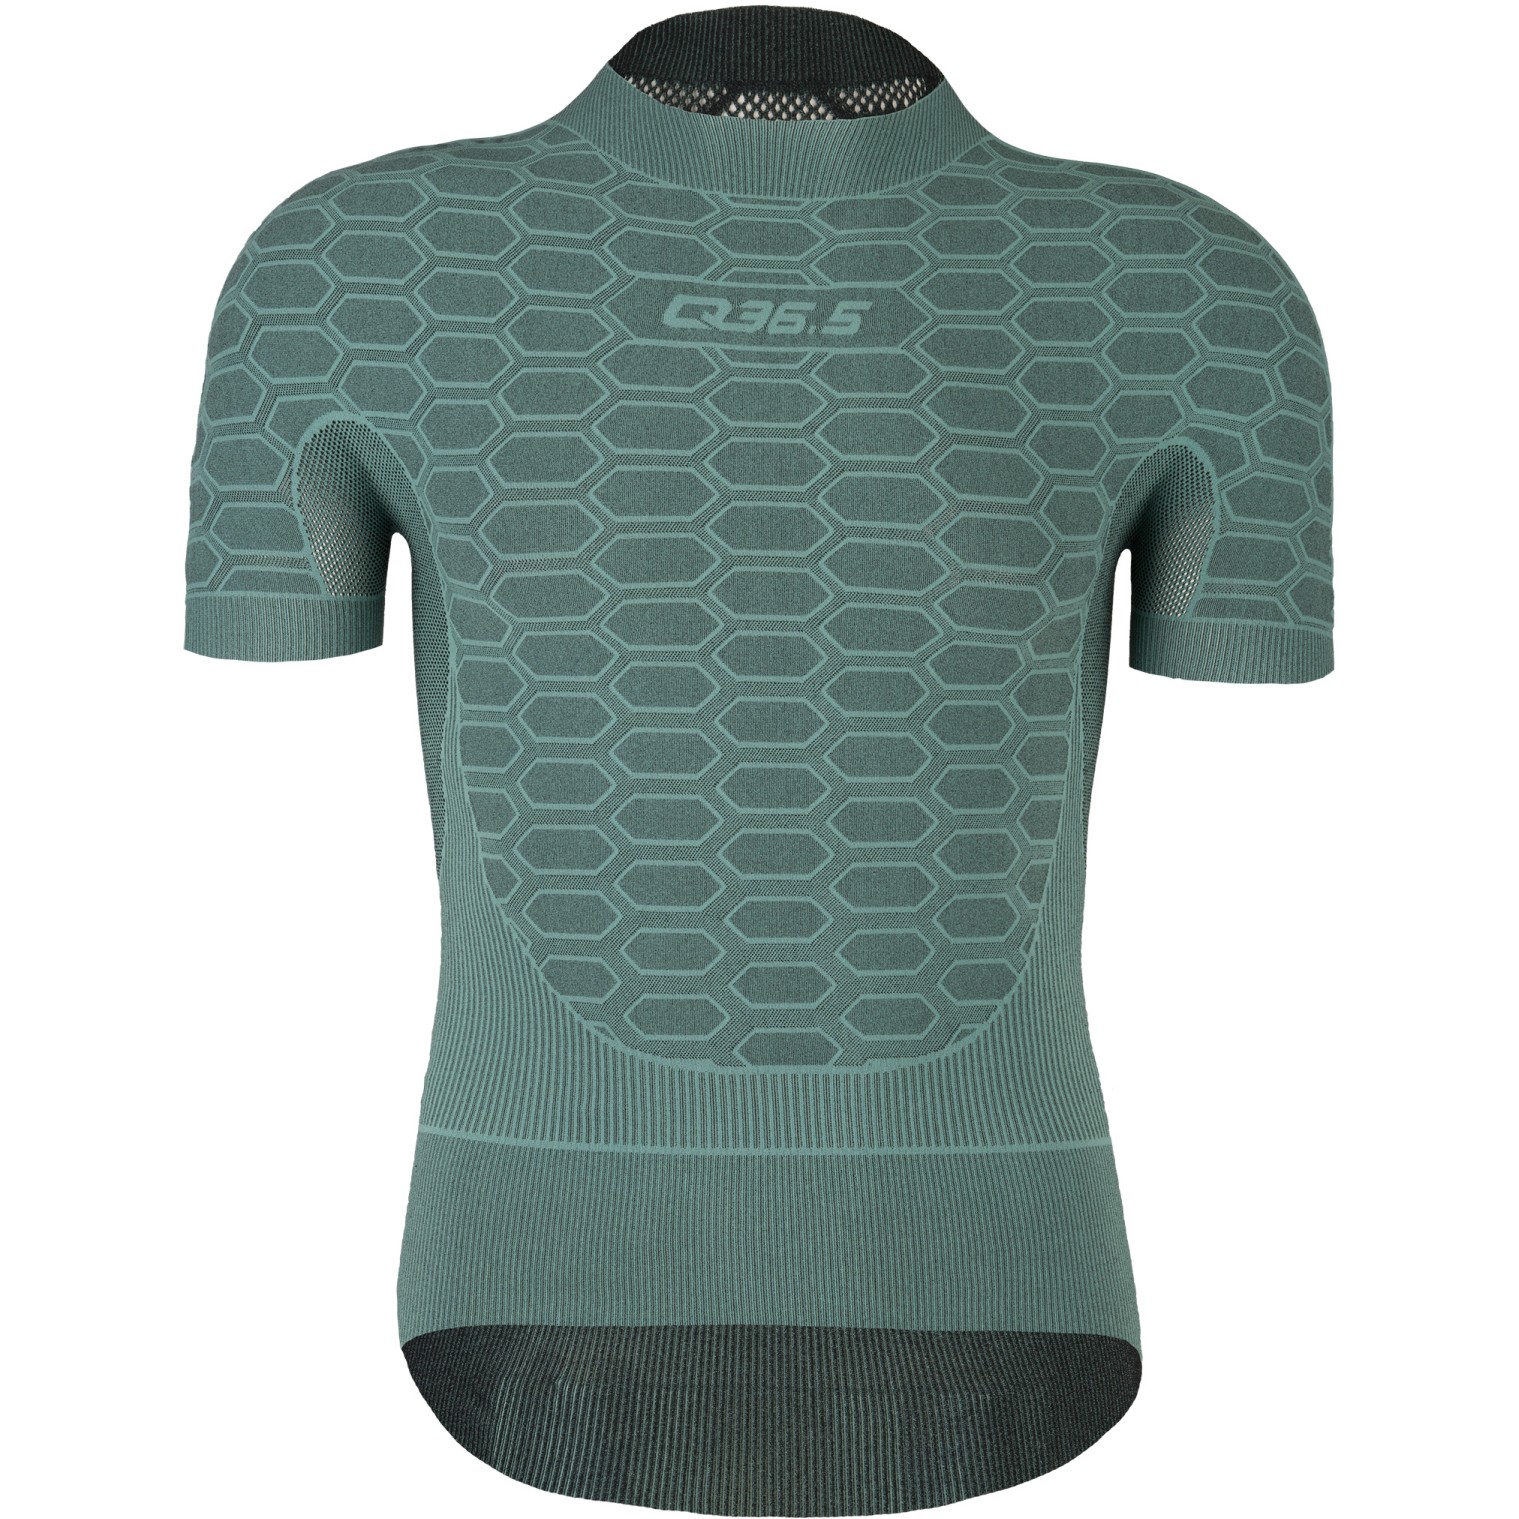 Picture of Q36.5 Base Layer 2 Short Sleeve - olive green